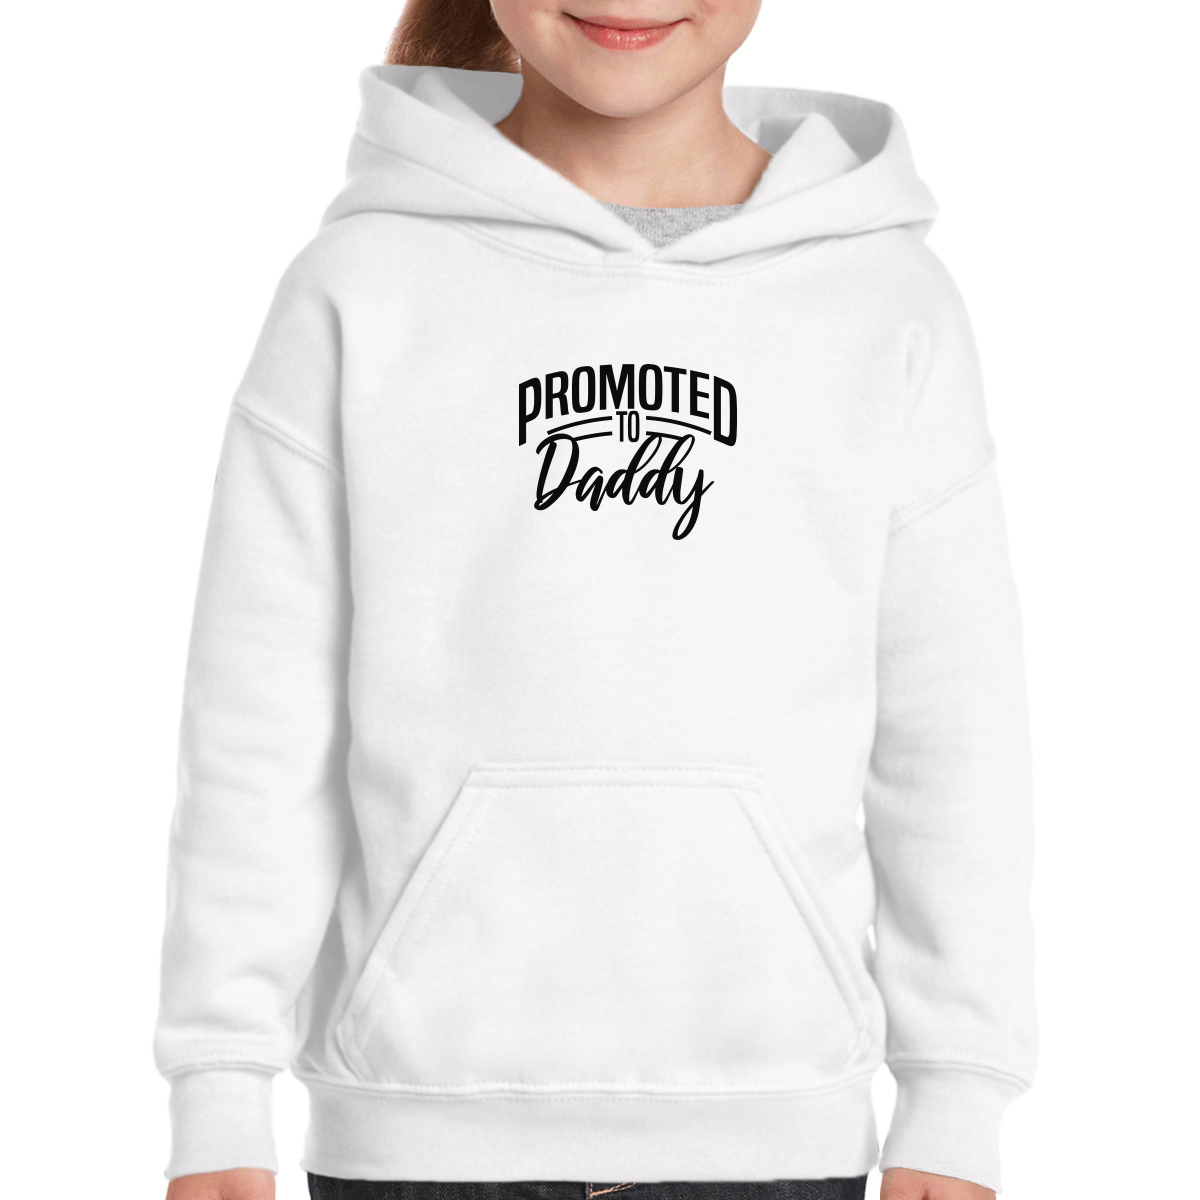 Promoted to daddy Kids Hoodie | White